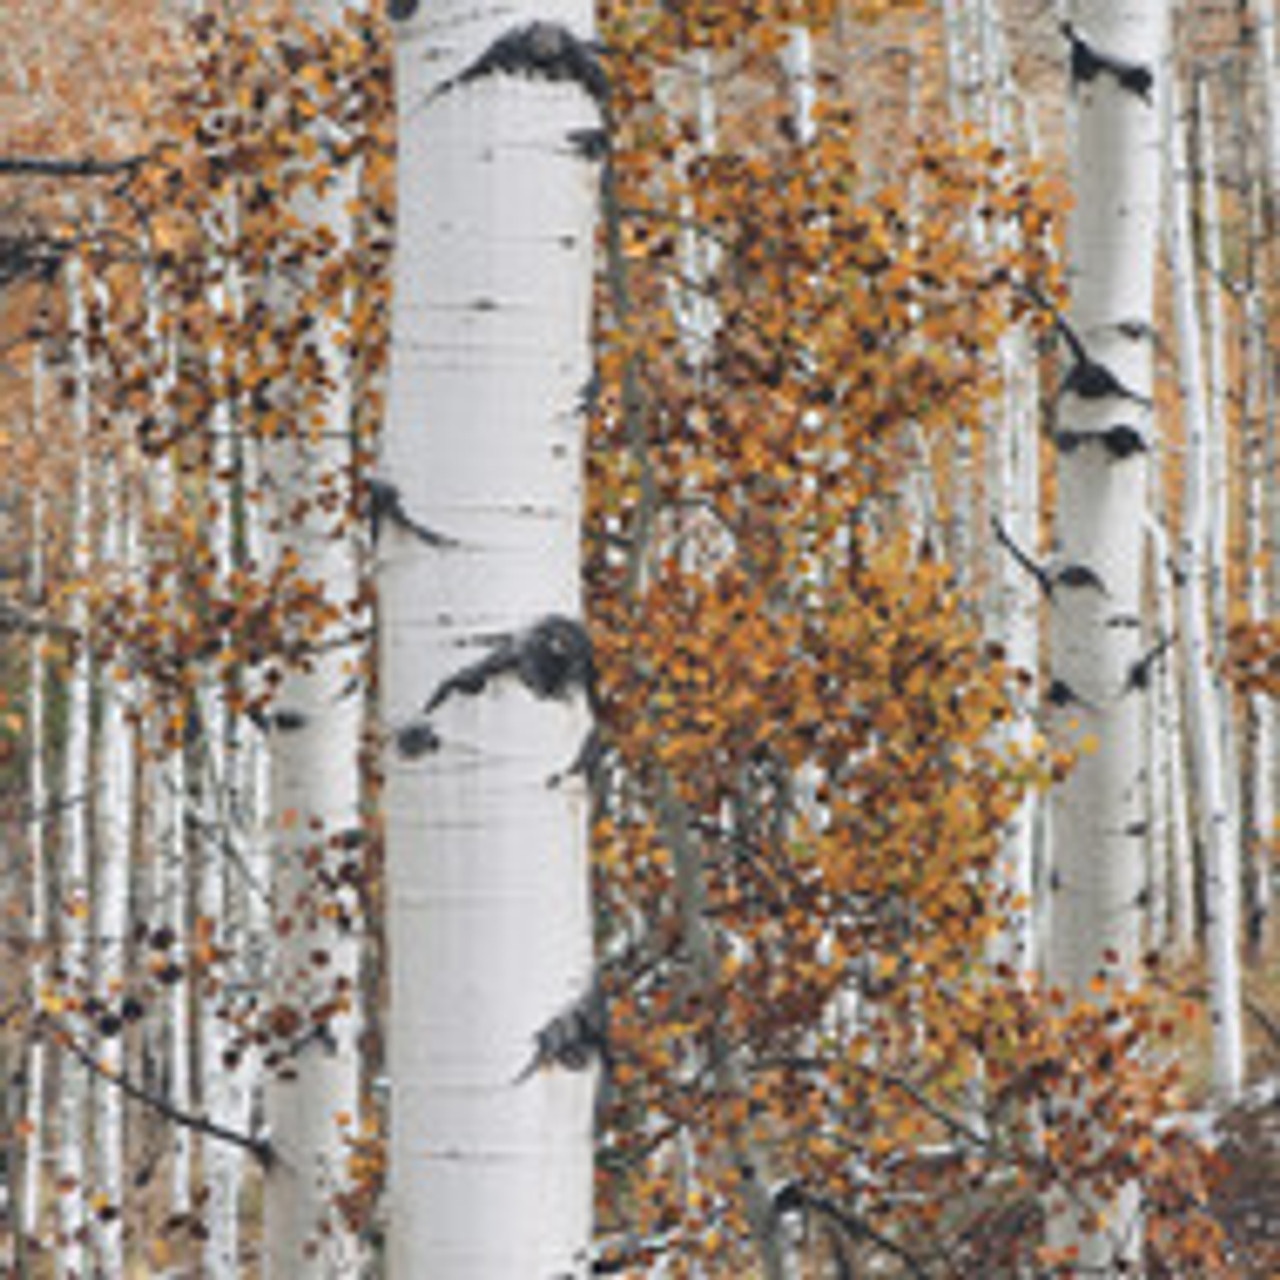 Birch trees are a common site across the North woods